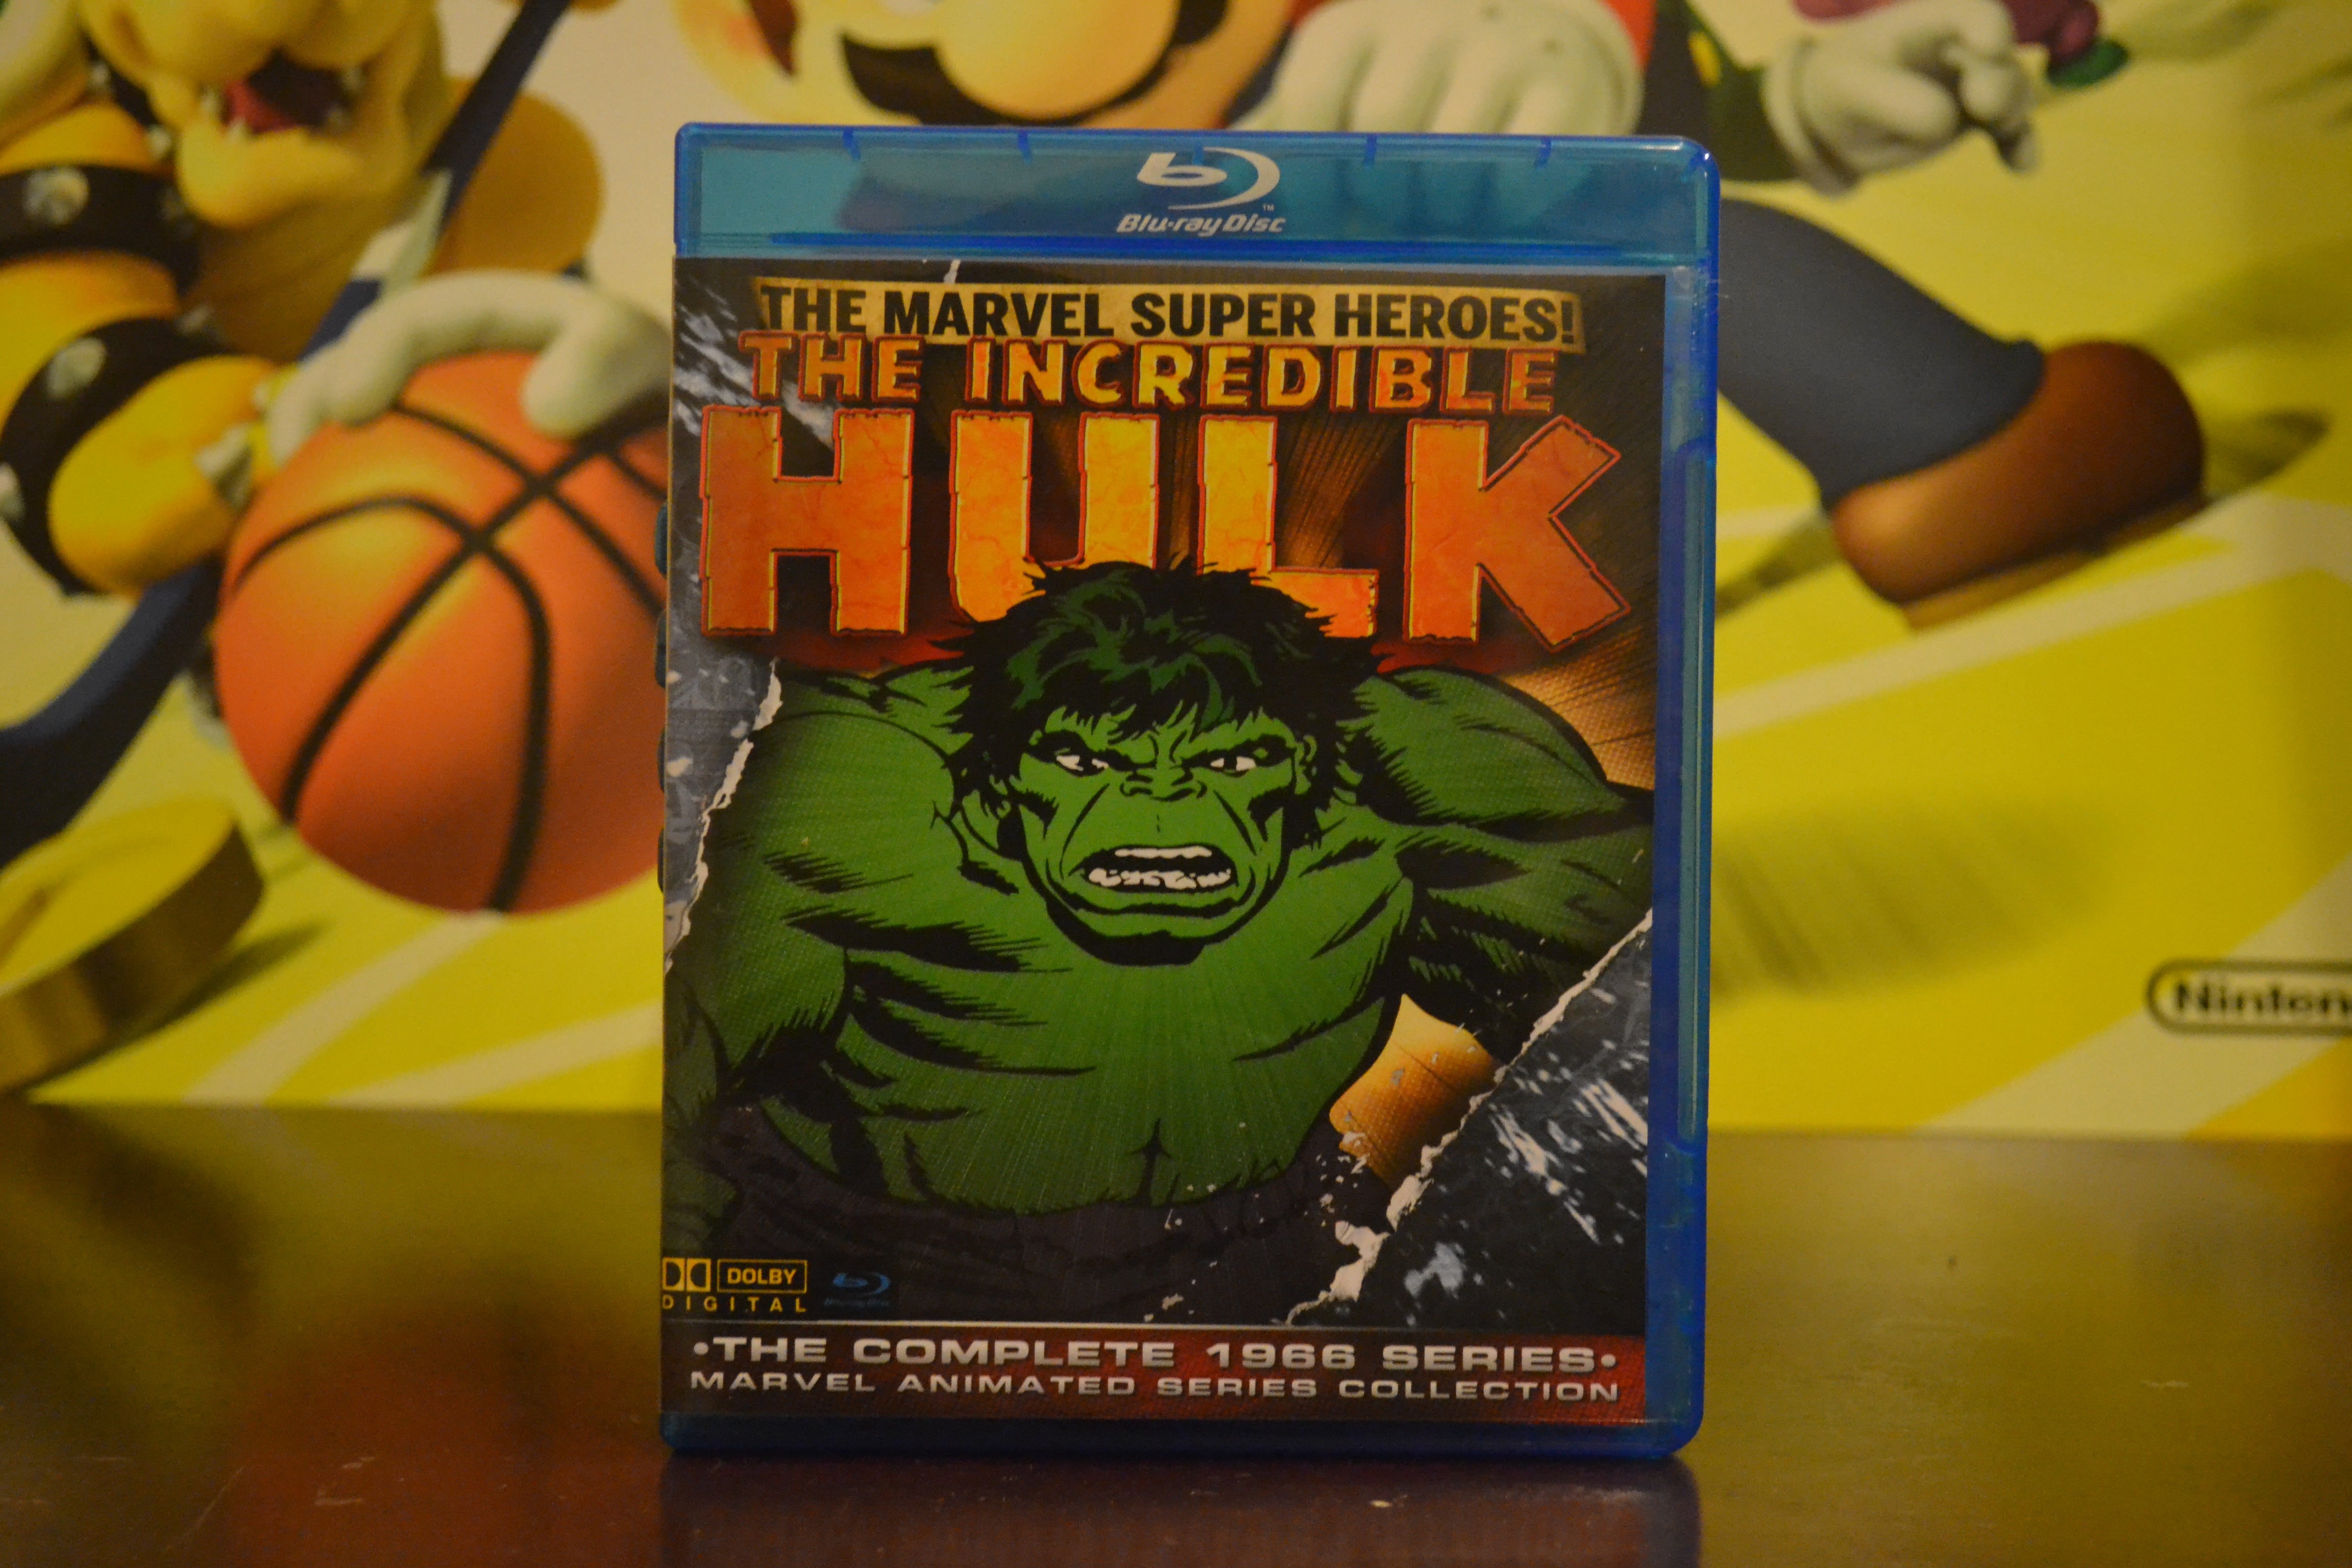 The Incredible Hulk The Complete 1966 Series Blu-Ray Set